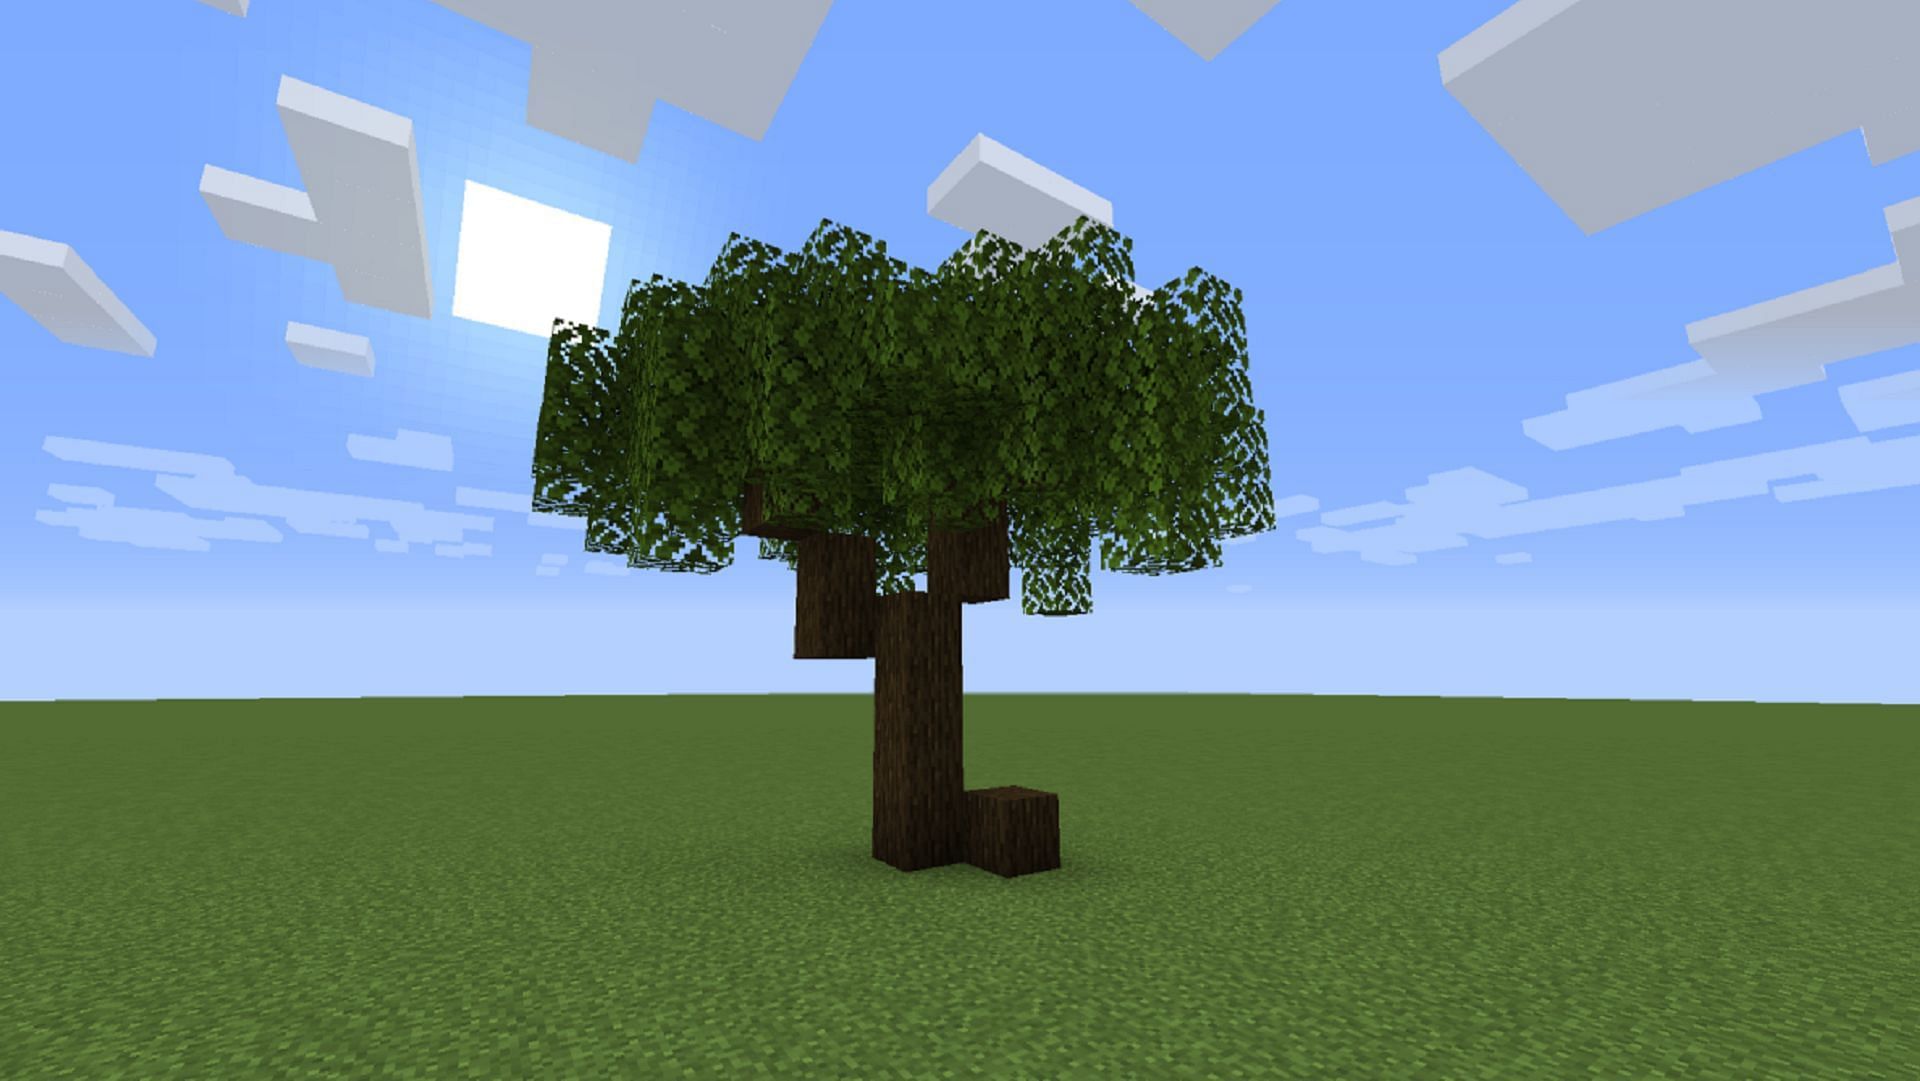 Custom tree designs are much more appealing compared to standard Minecraft trees (Image via Minecraft Build Inspiration/tumblr)